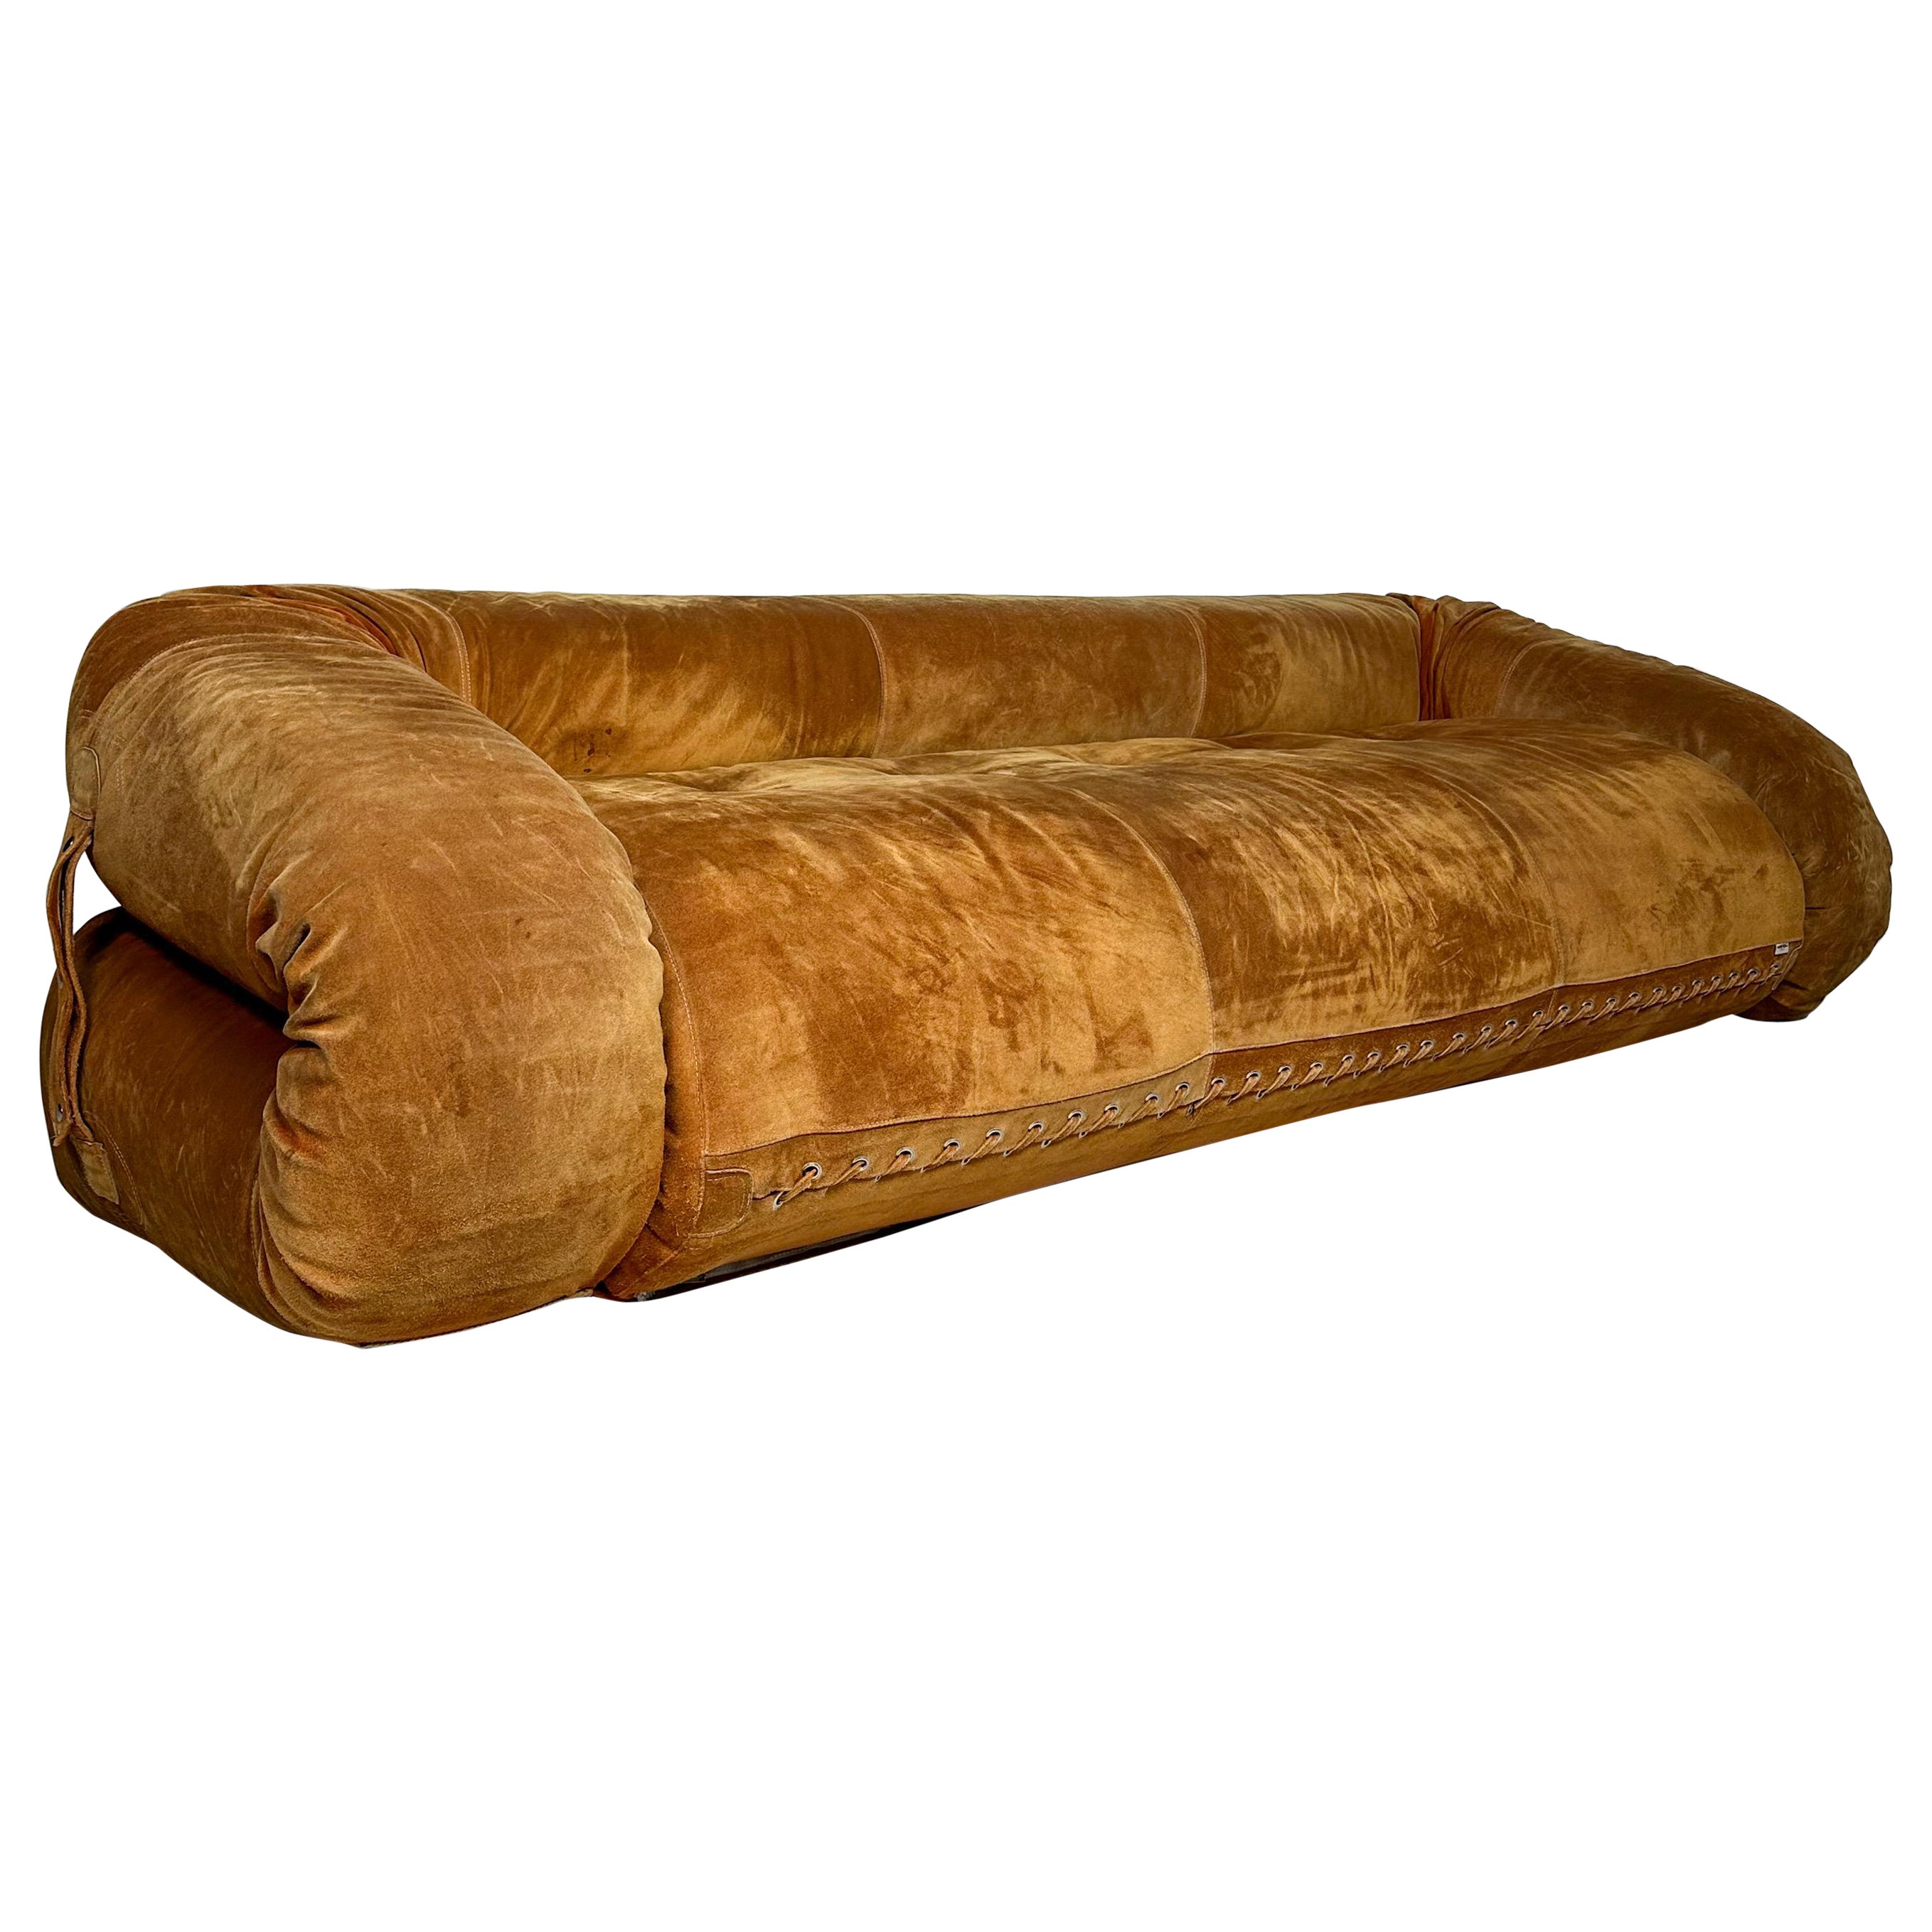 Vintage Suede 3-Seater Anfibio Sofa Bed by Alessandro Becchi for Giovannetti 70s For Sale